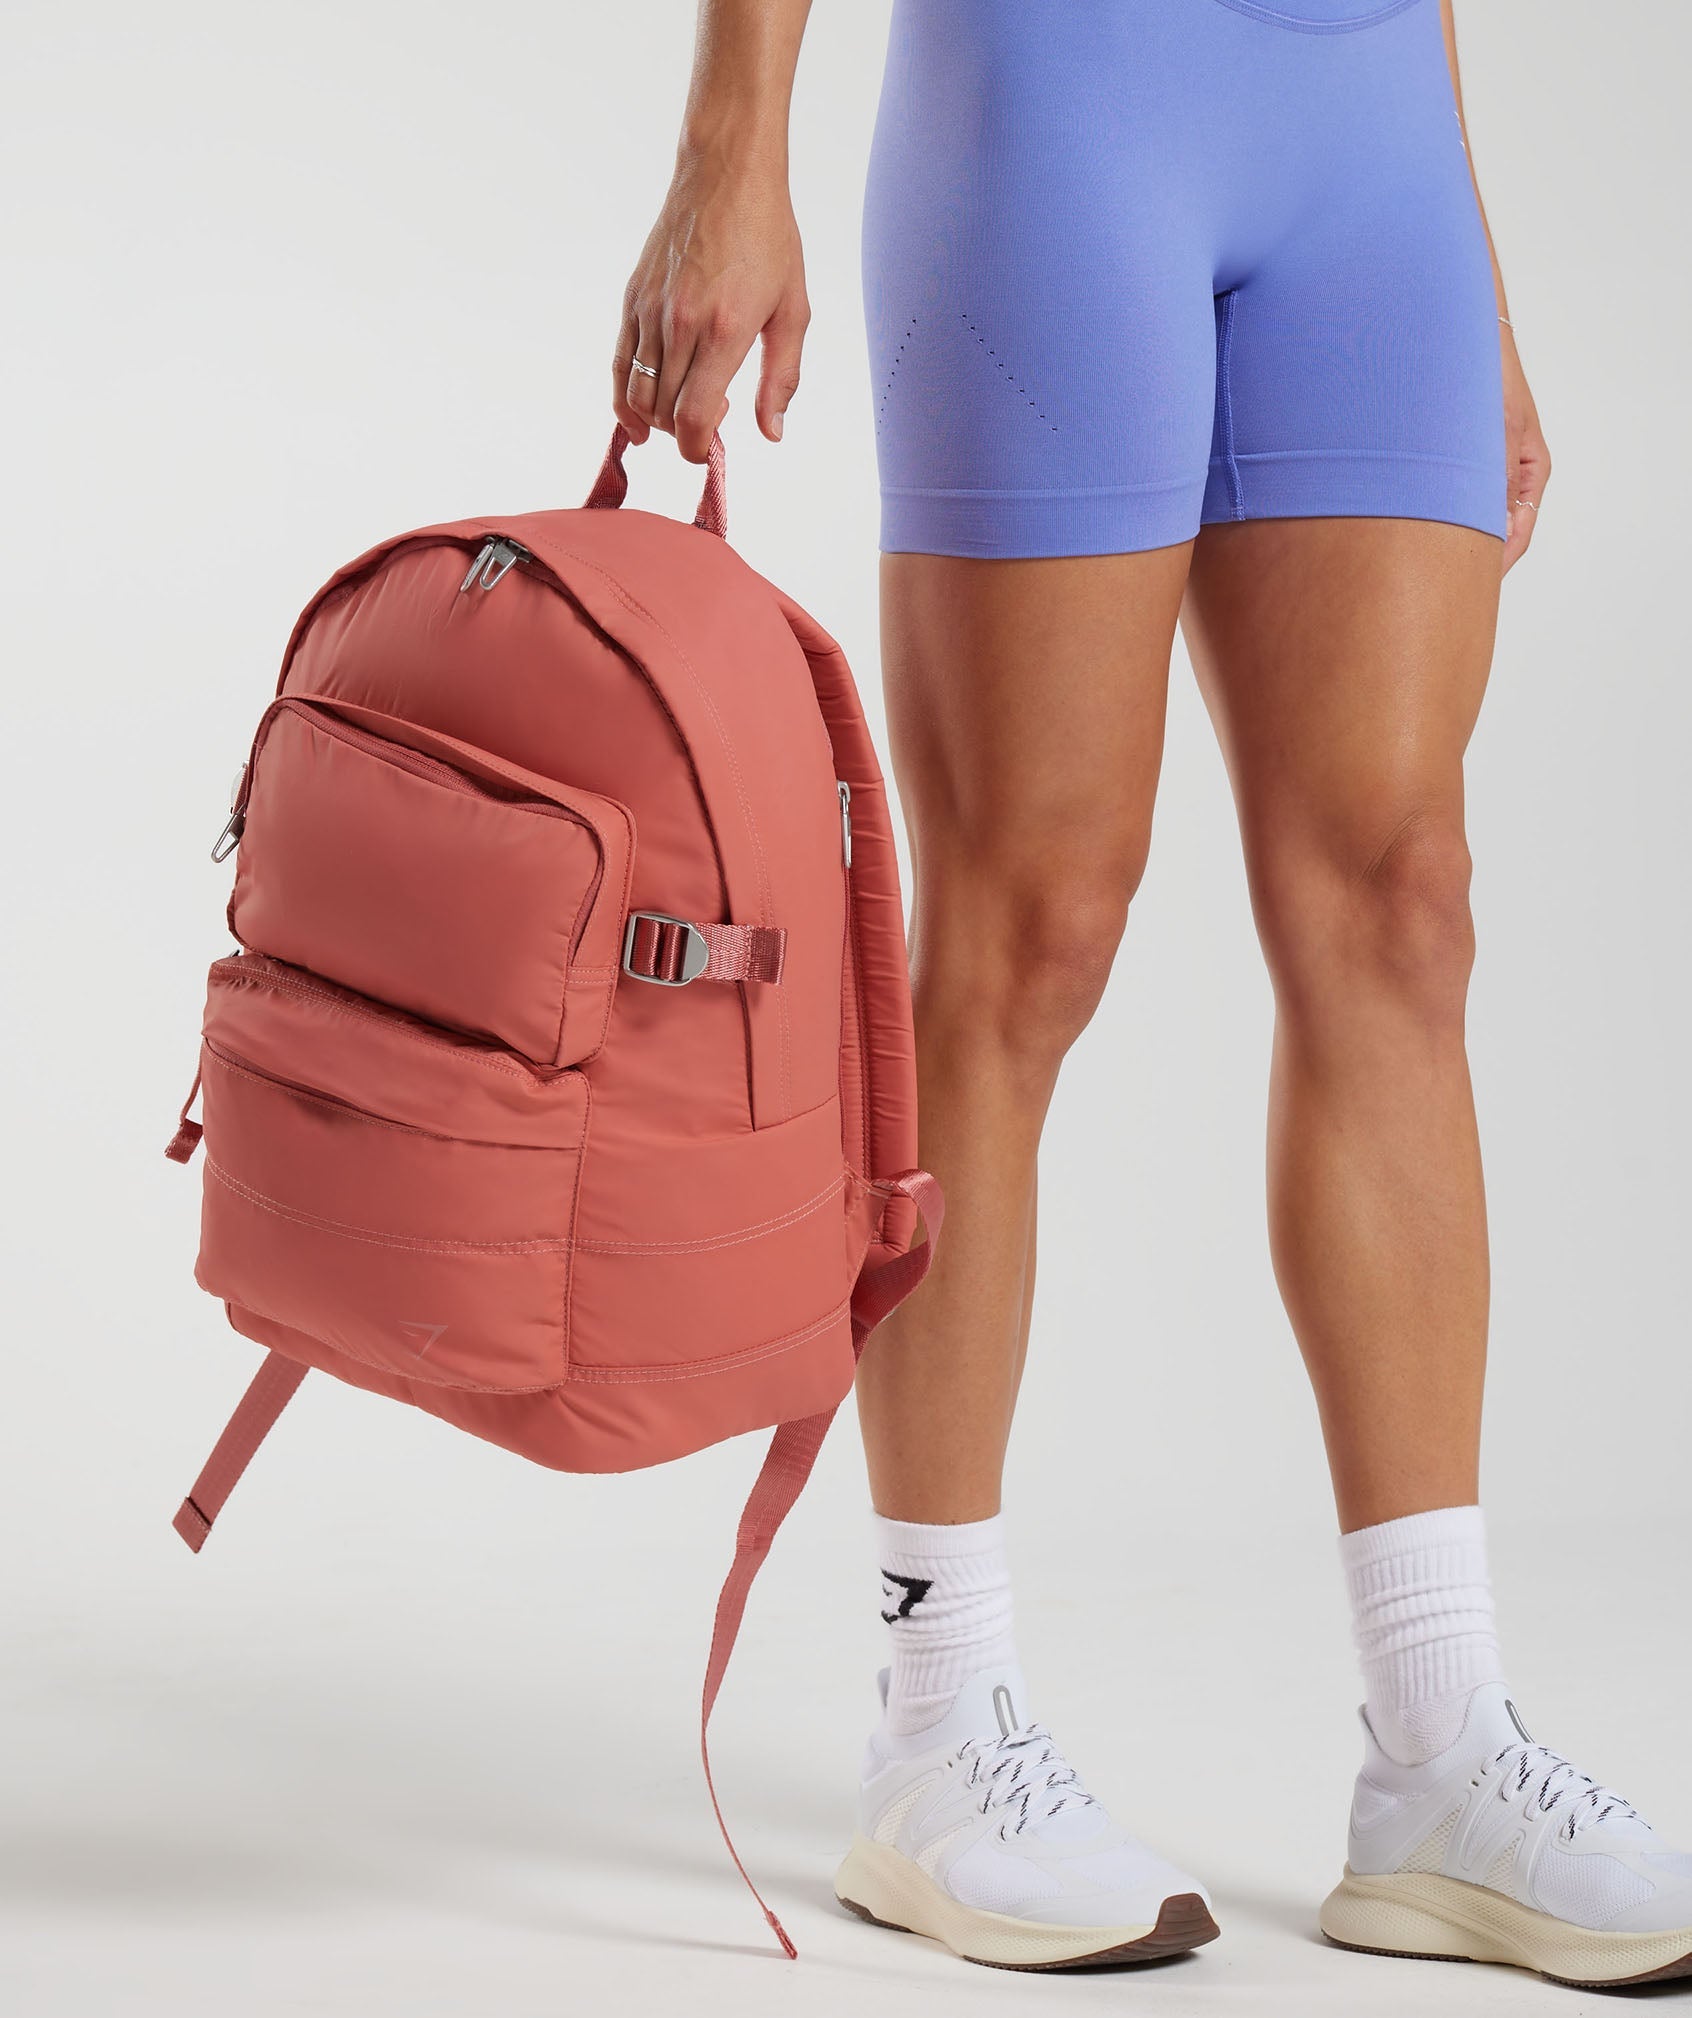 Premium Lifestyle Backpack in Terracotta Pink